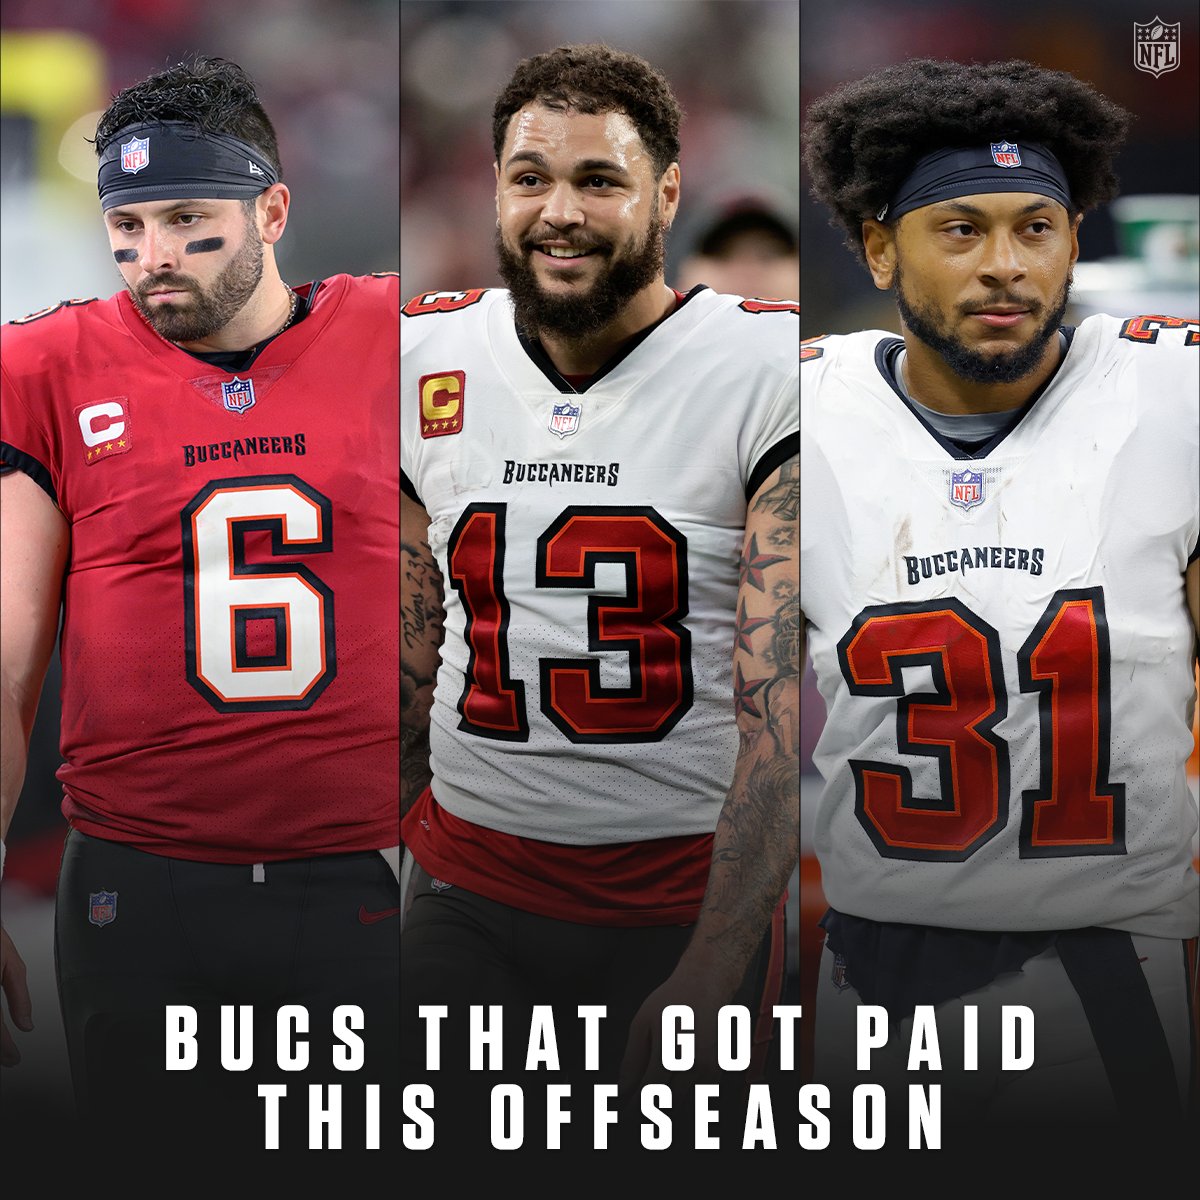 Bucs made sure to keep the talent in Tampa 💰